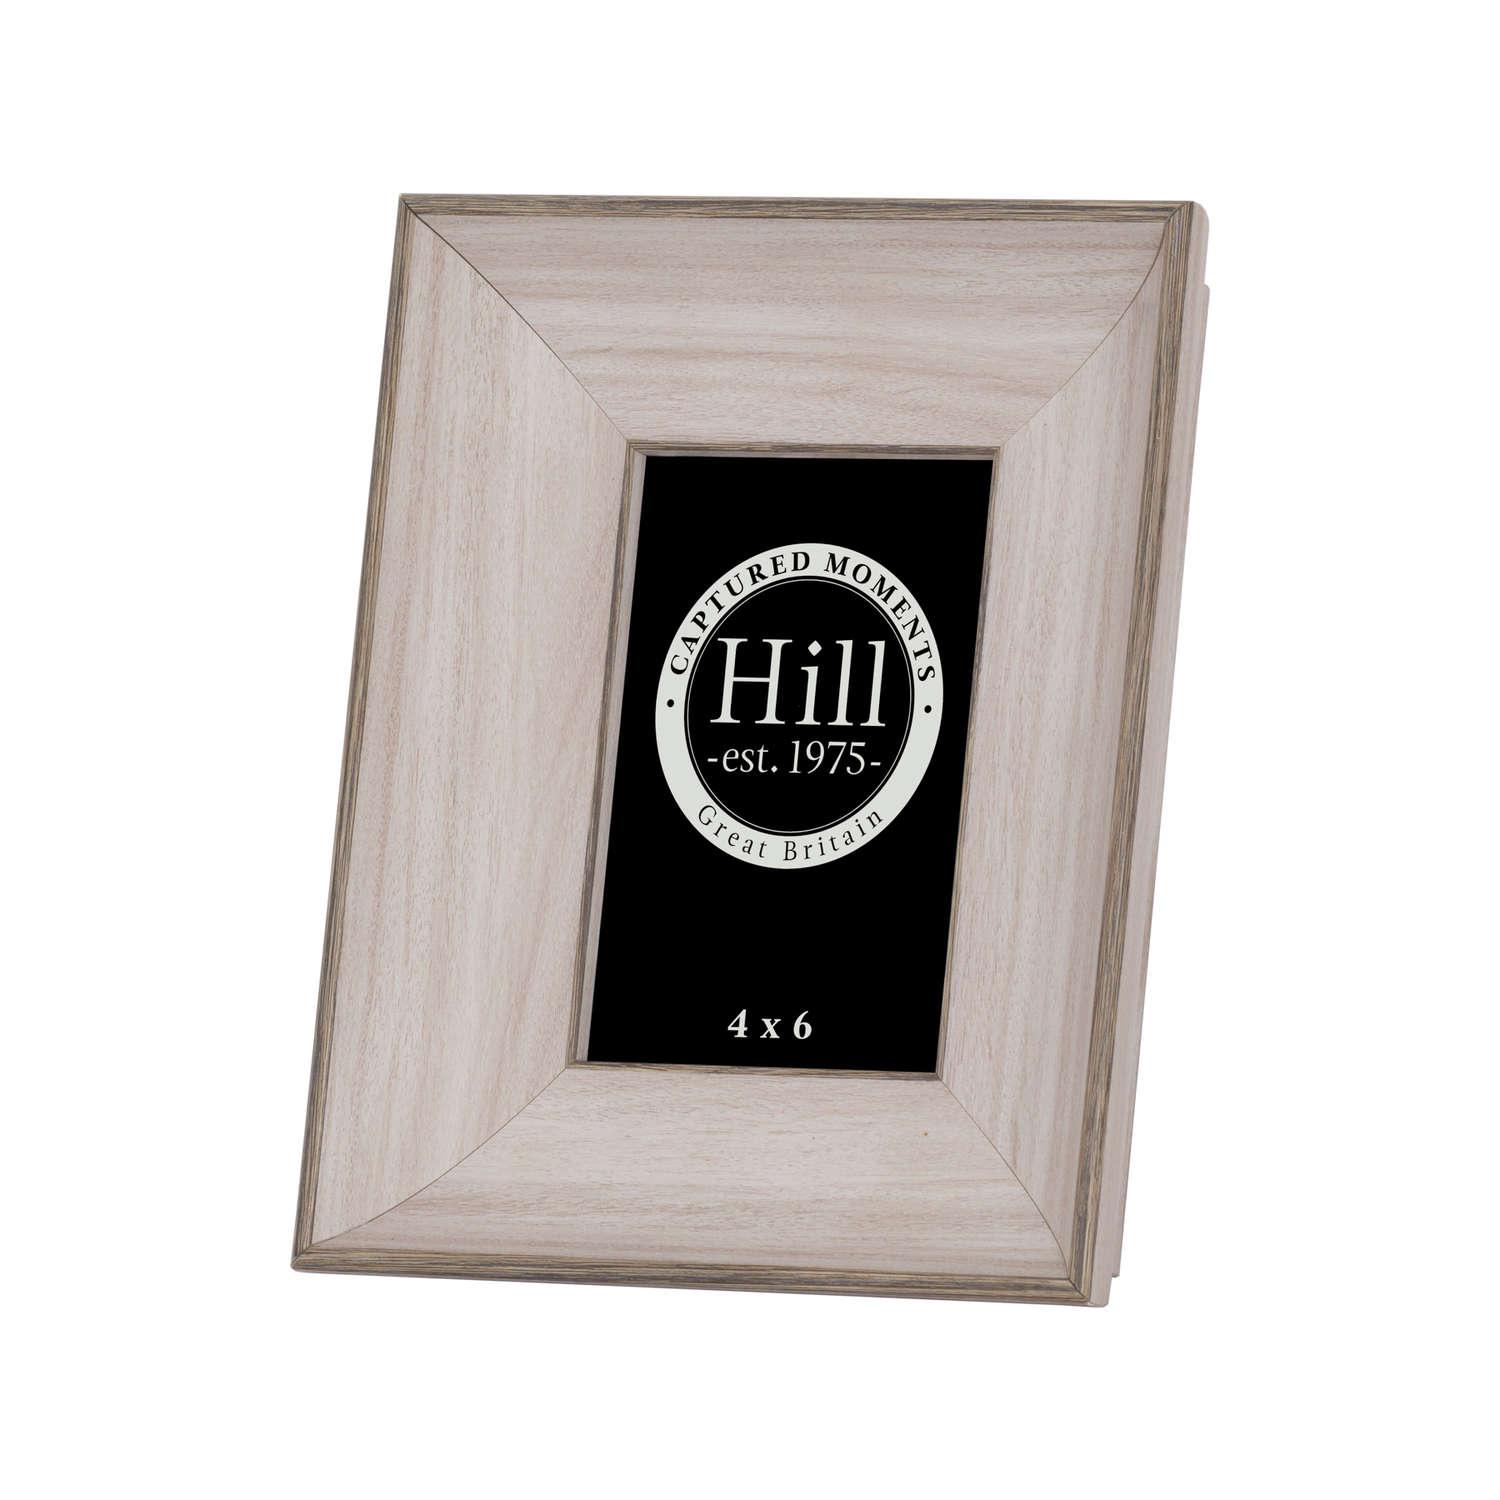 View White Washed Wood Photo Frame 4X6 information